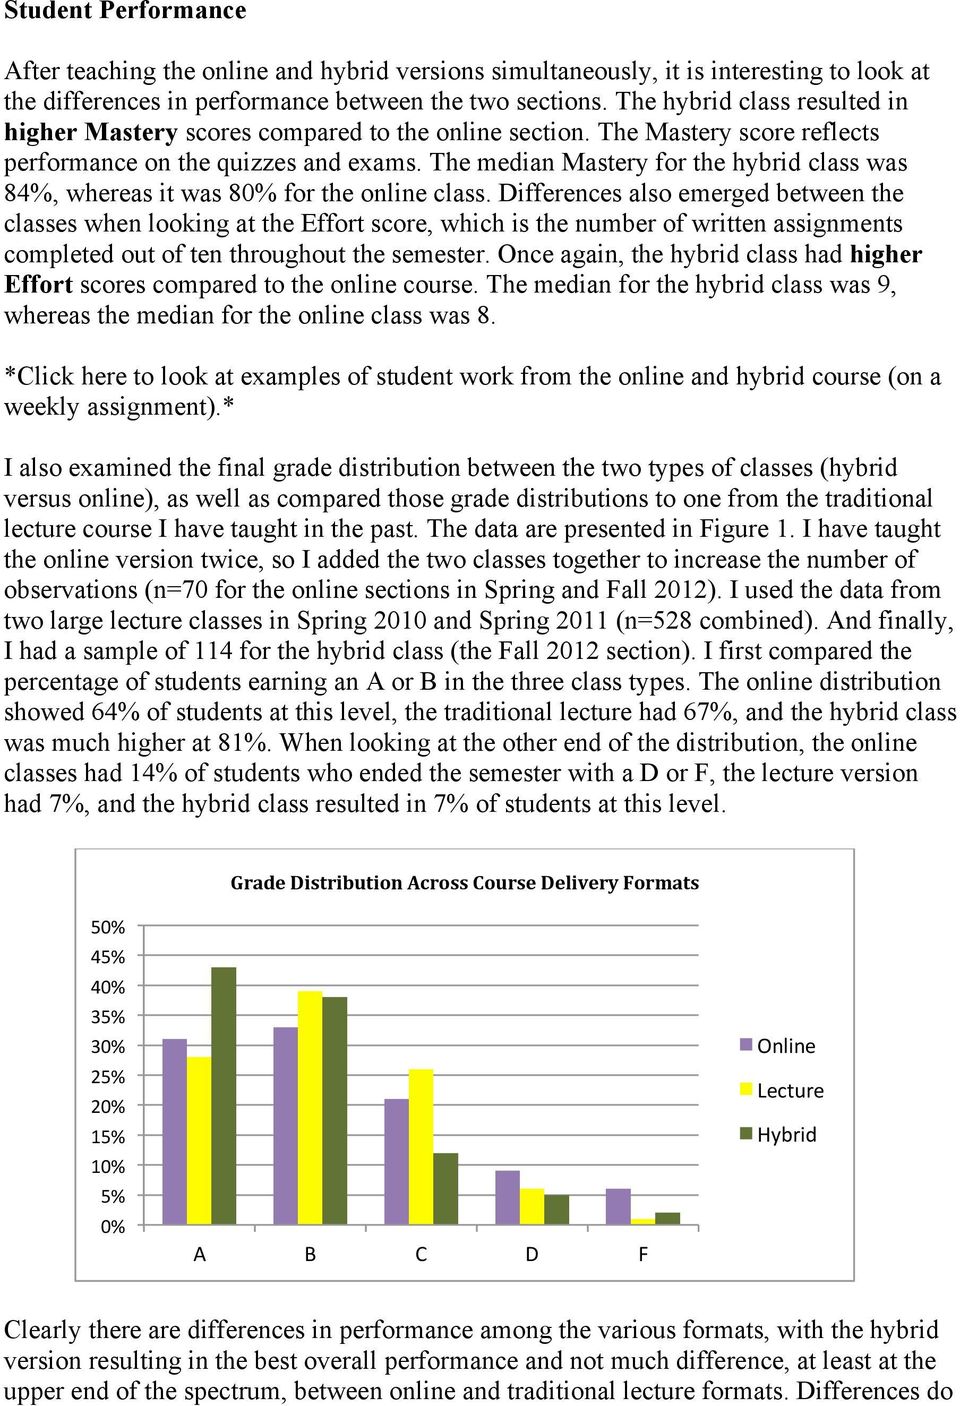 The median Mastery for the hybrid class was 84%, whereas it was 80% for the online class.